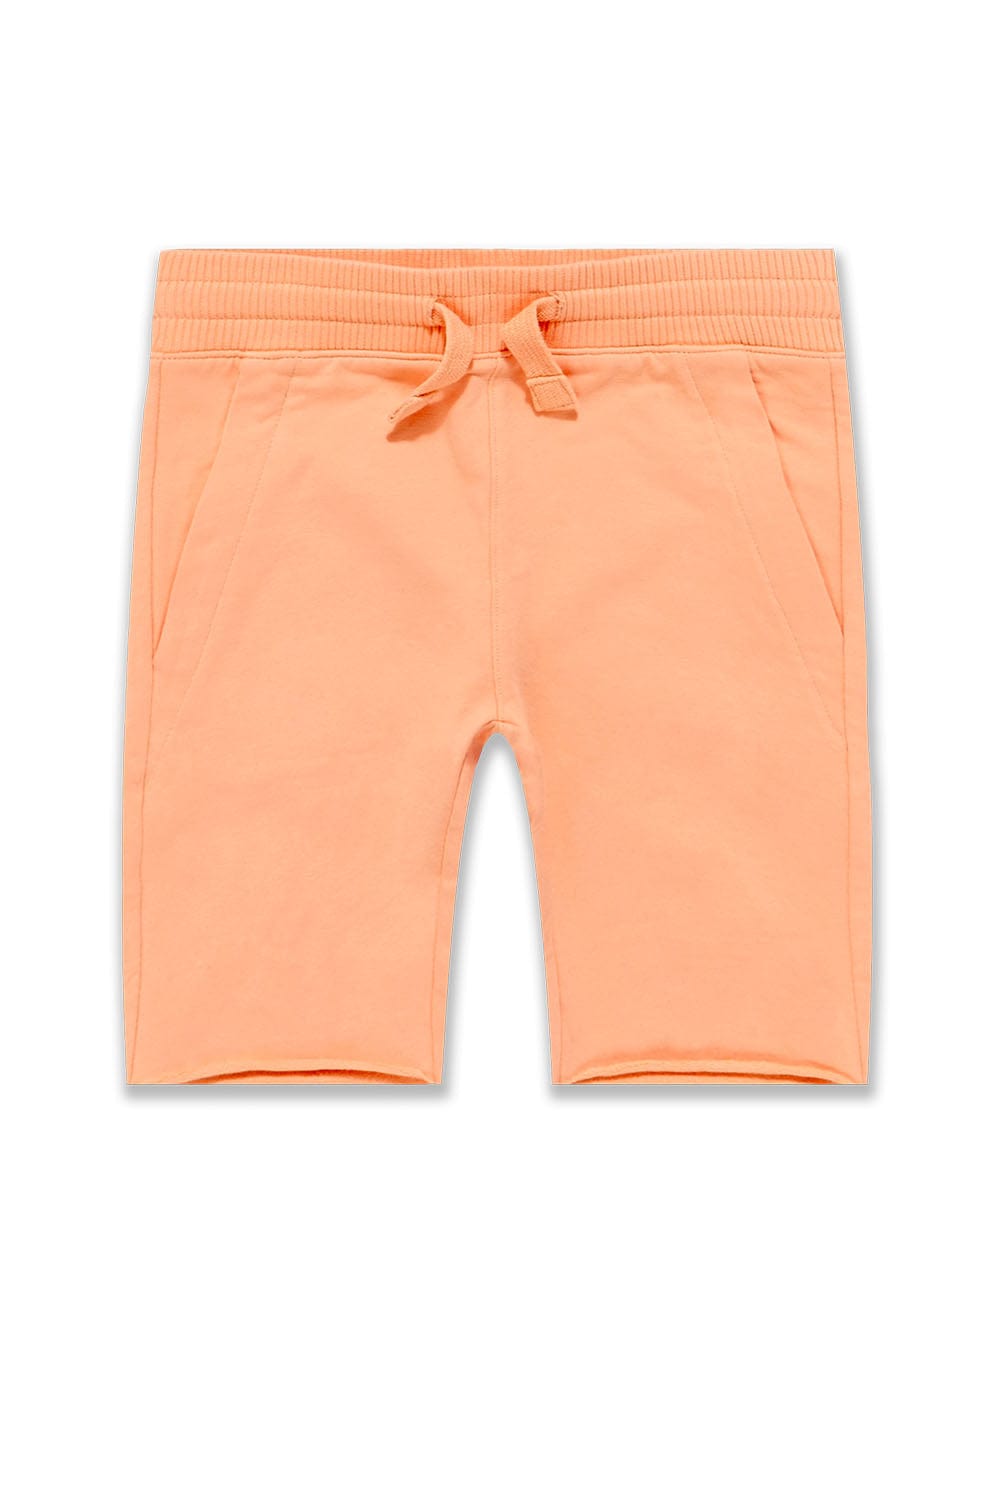 JC Kids Kids Palma French Terry Shorts (Exclusive) (Memorial Day Markdown) Peach / 2